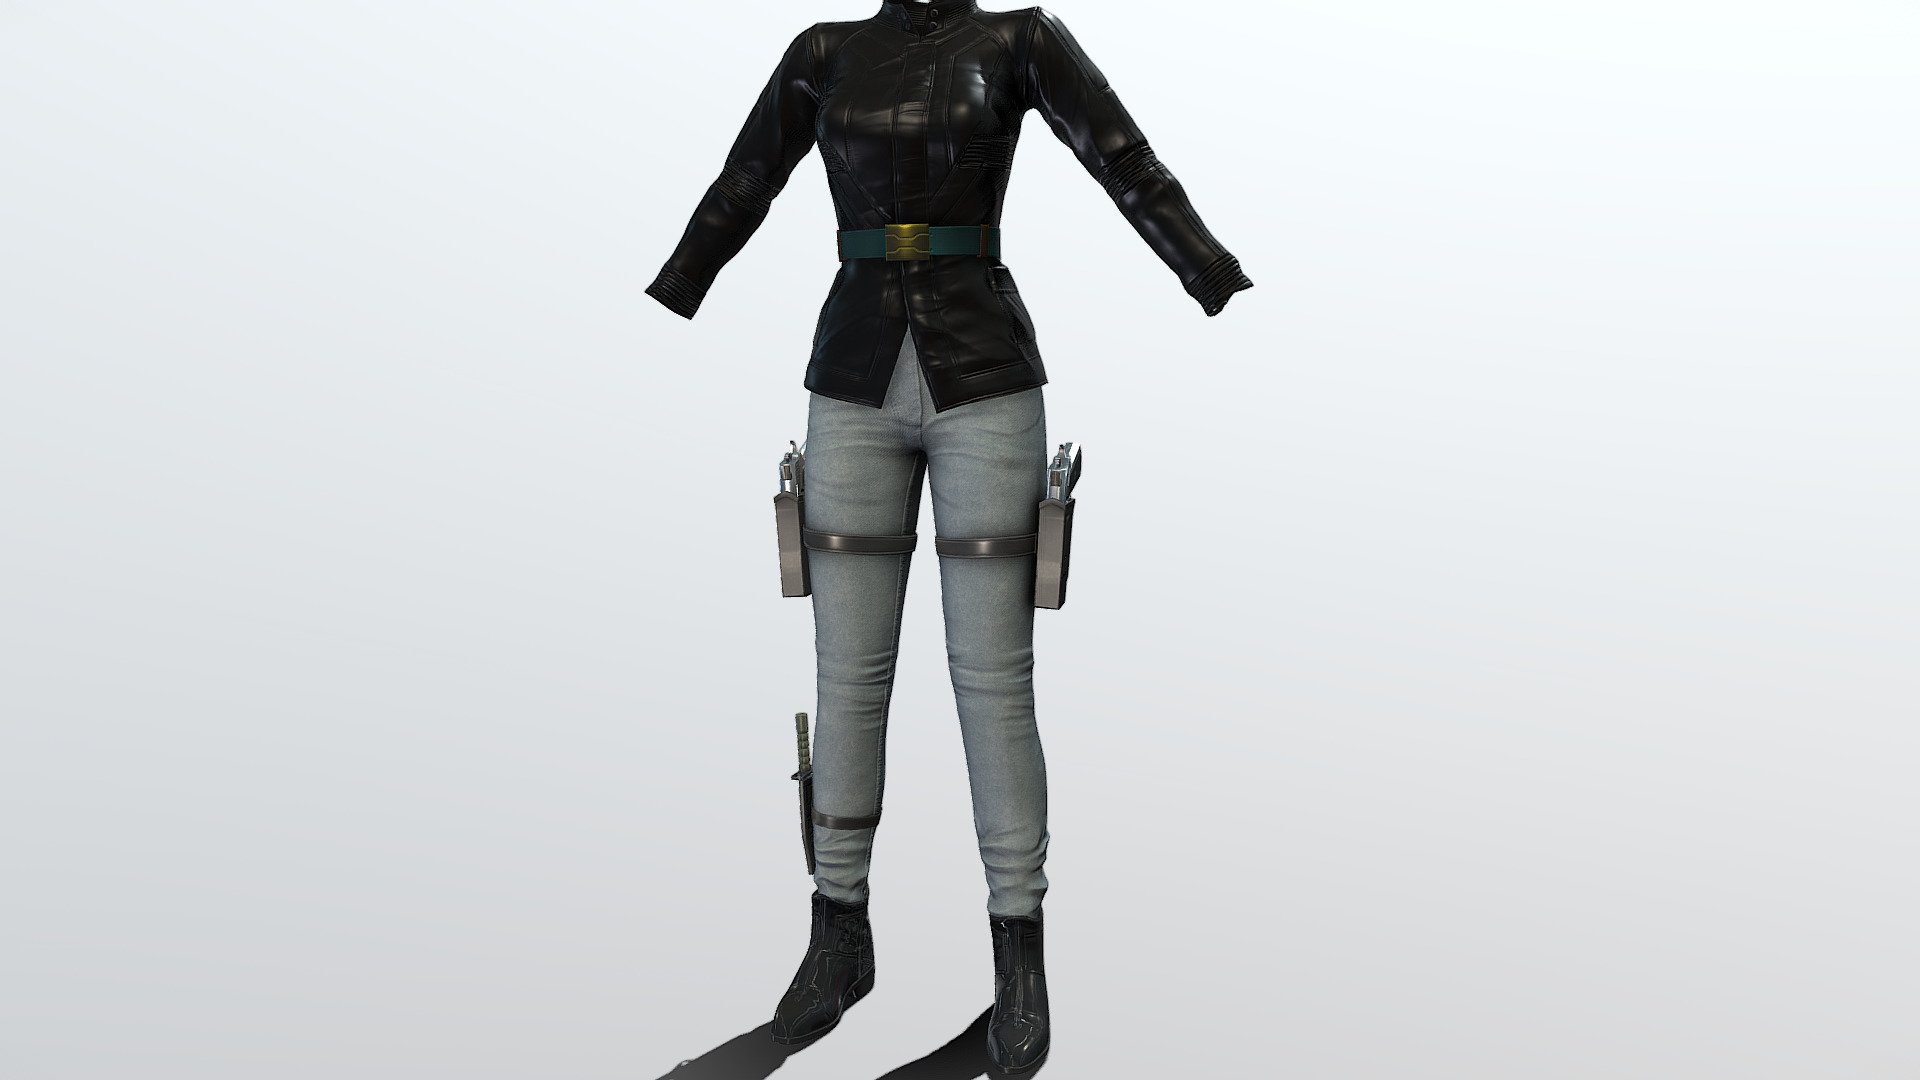 Jacket + Pants + Guns + Knife + Boots

Can be fitted to any character

Clean topology

No overlapping smart optimum unwrapped UVs

High-quality realistic textures

FBX, OBJ, gITF, USDZ (request other formats)

PBR or Classic

Please ask any other questions.

Type     user:3dia &ldquo;search term